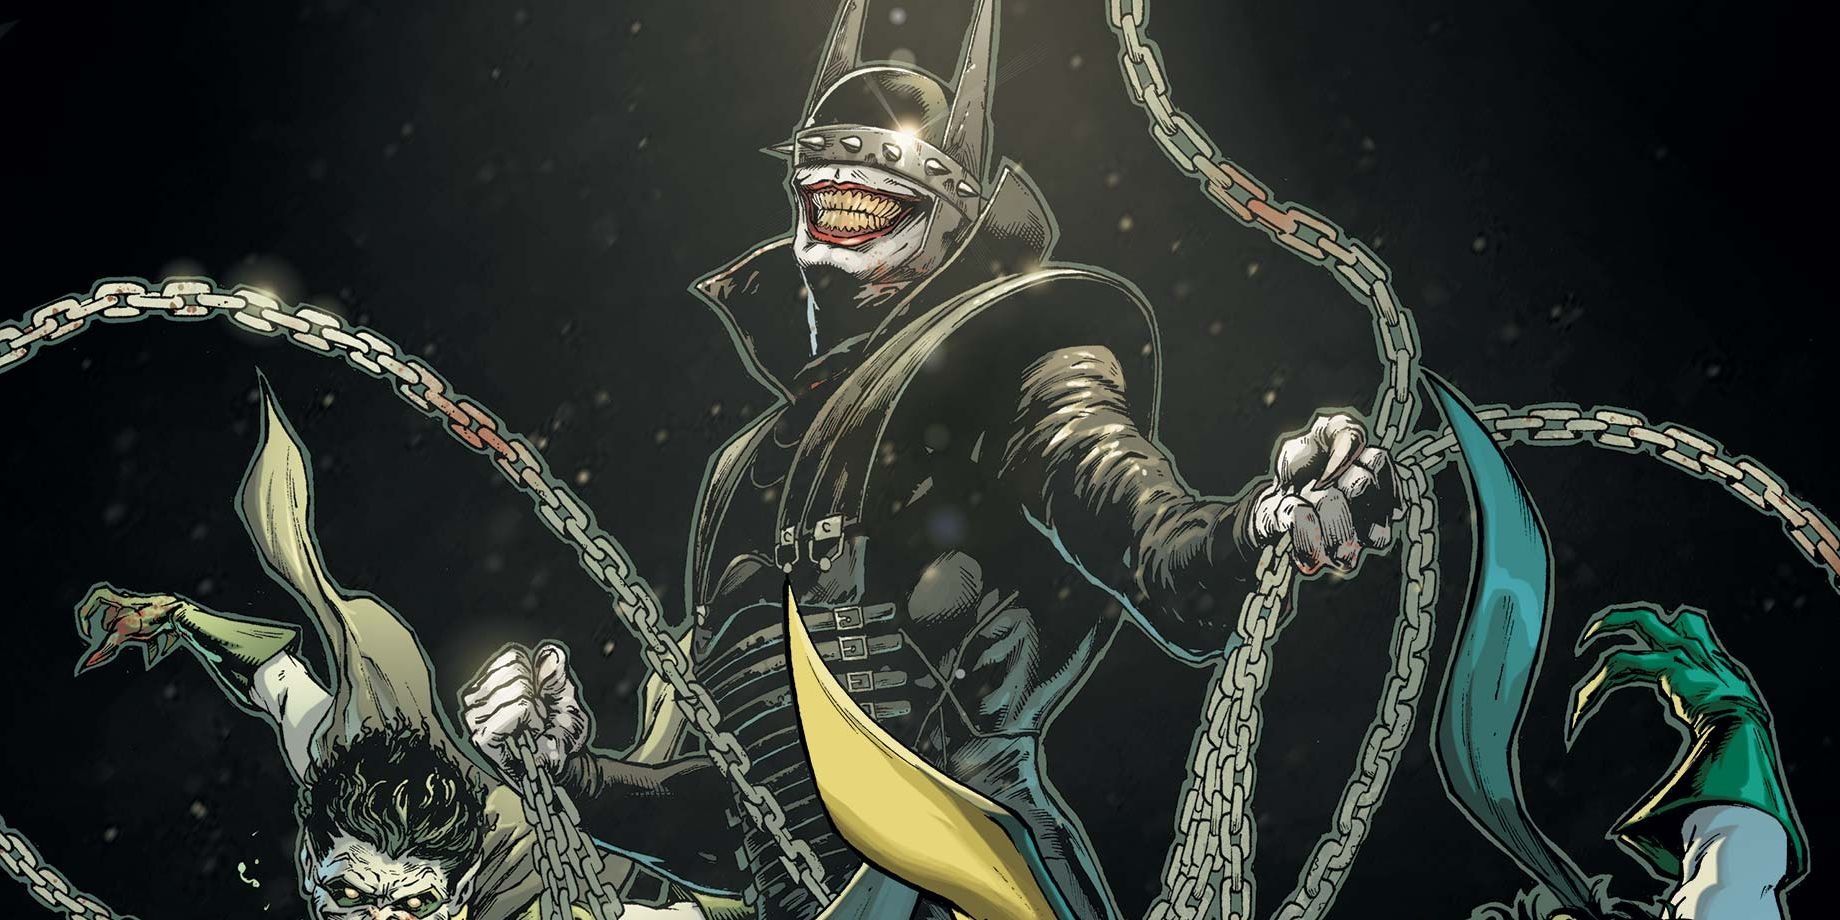 DC Comics' The Batman Who Laughs cackles while chaining up his enemies.